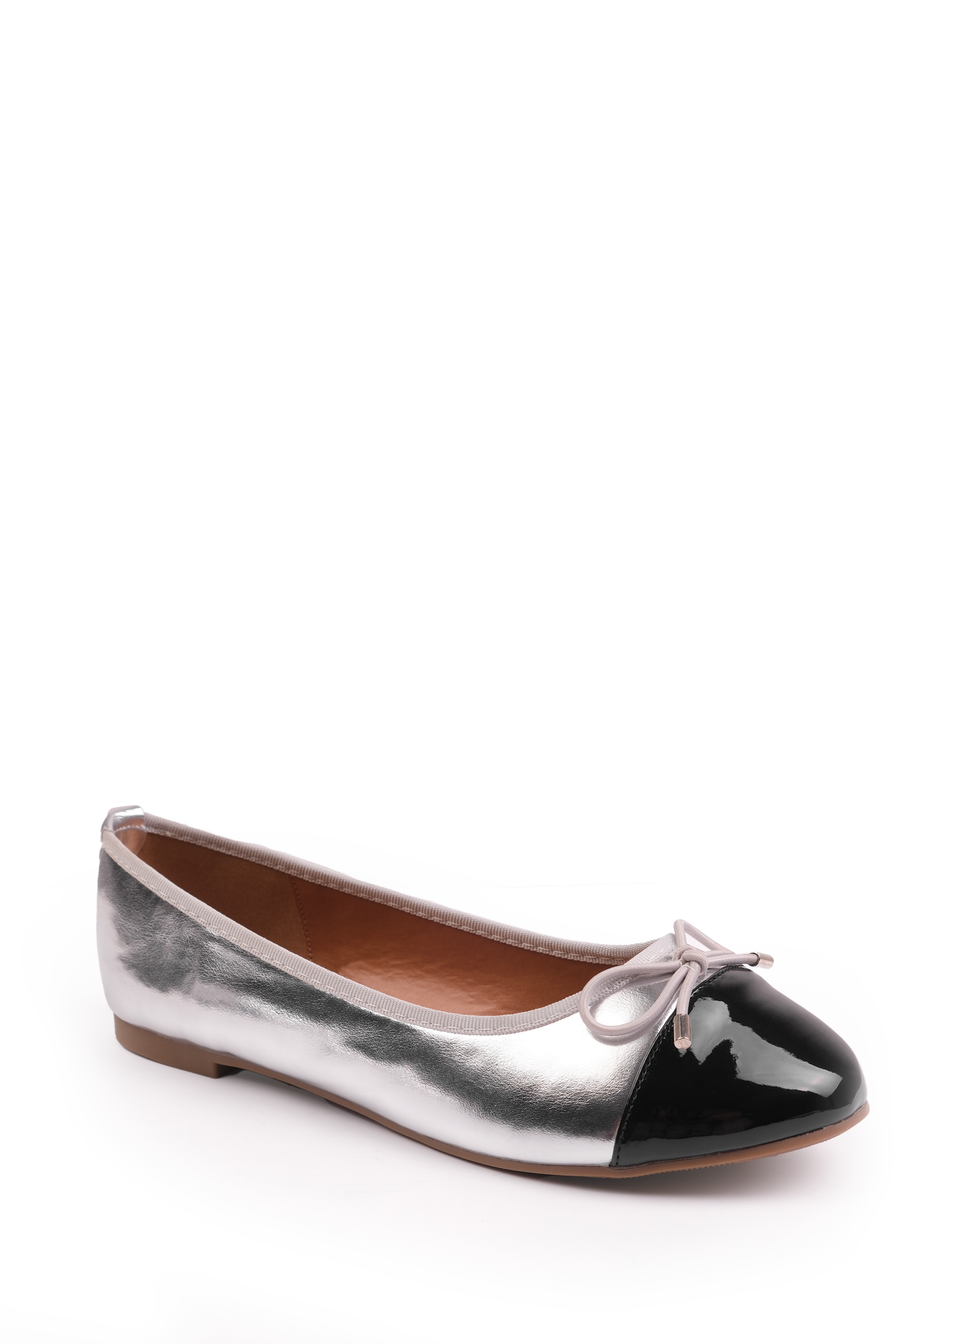 Where's That From Silver Janice Ballerina Flats With Bow Detail